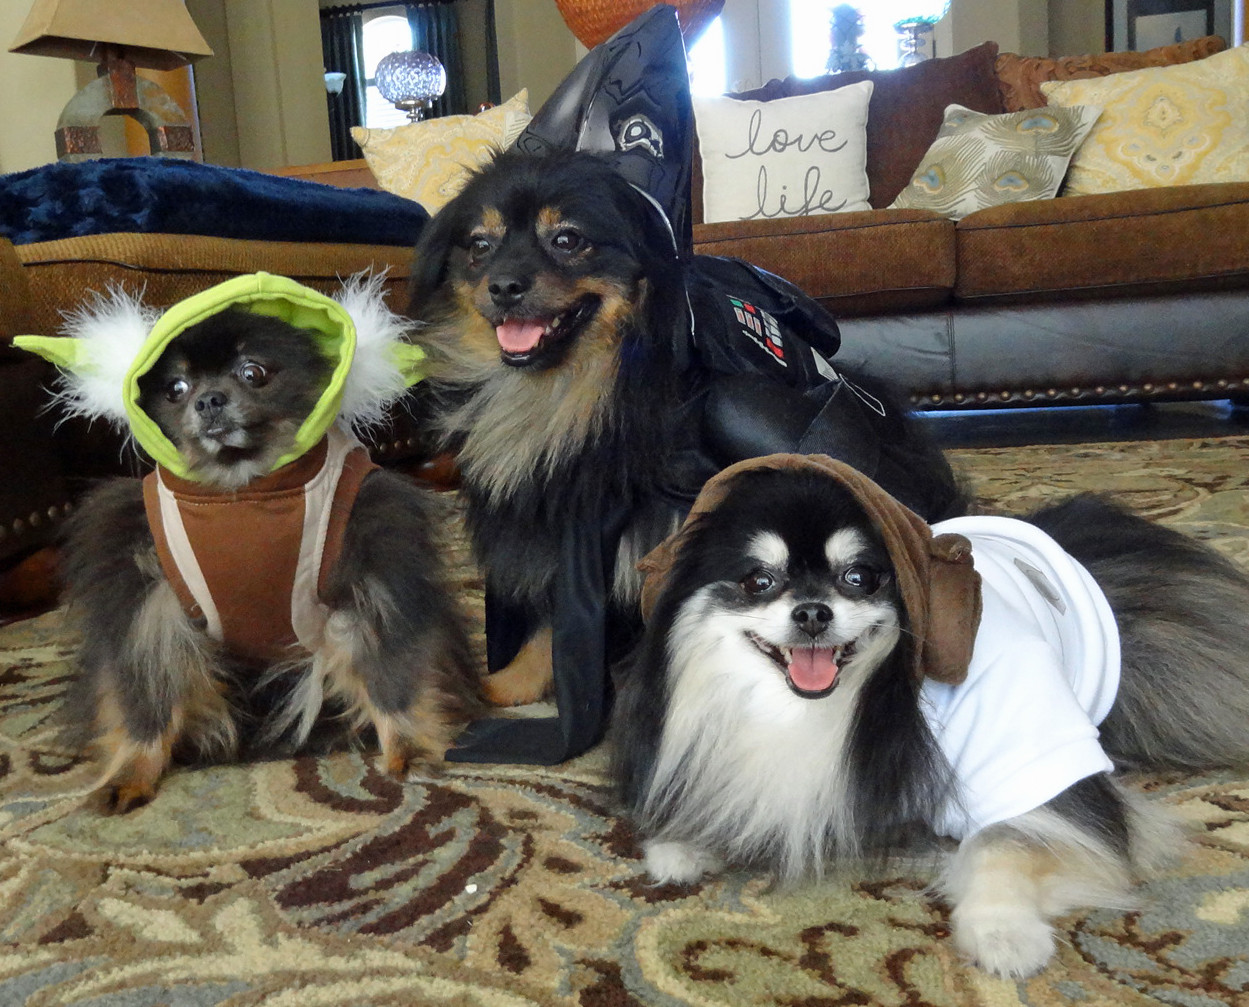 WINNERS - MENKER PETS - In a galaxy far, far away... The gang's all here with the Menker pets this year. Sammy will trick-or-treat as Yoda, Segundo is Darth Vader and Sofie is Princess Leia. The three Pomeranians are a true family, as Sofie is the mother of both Sammy and Segundo. Jennifer and Tom Menker are their proud parents and sent The Recorder this winning submission.